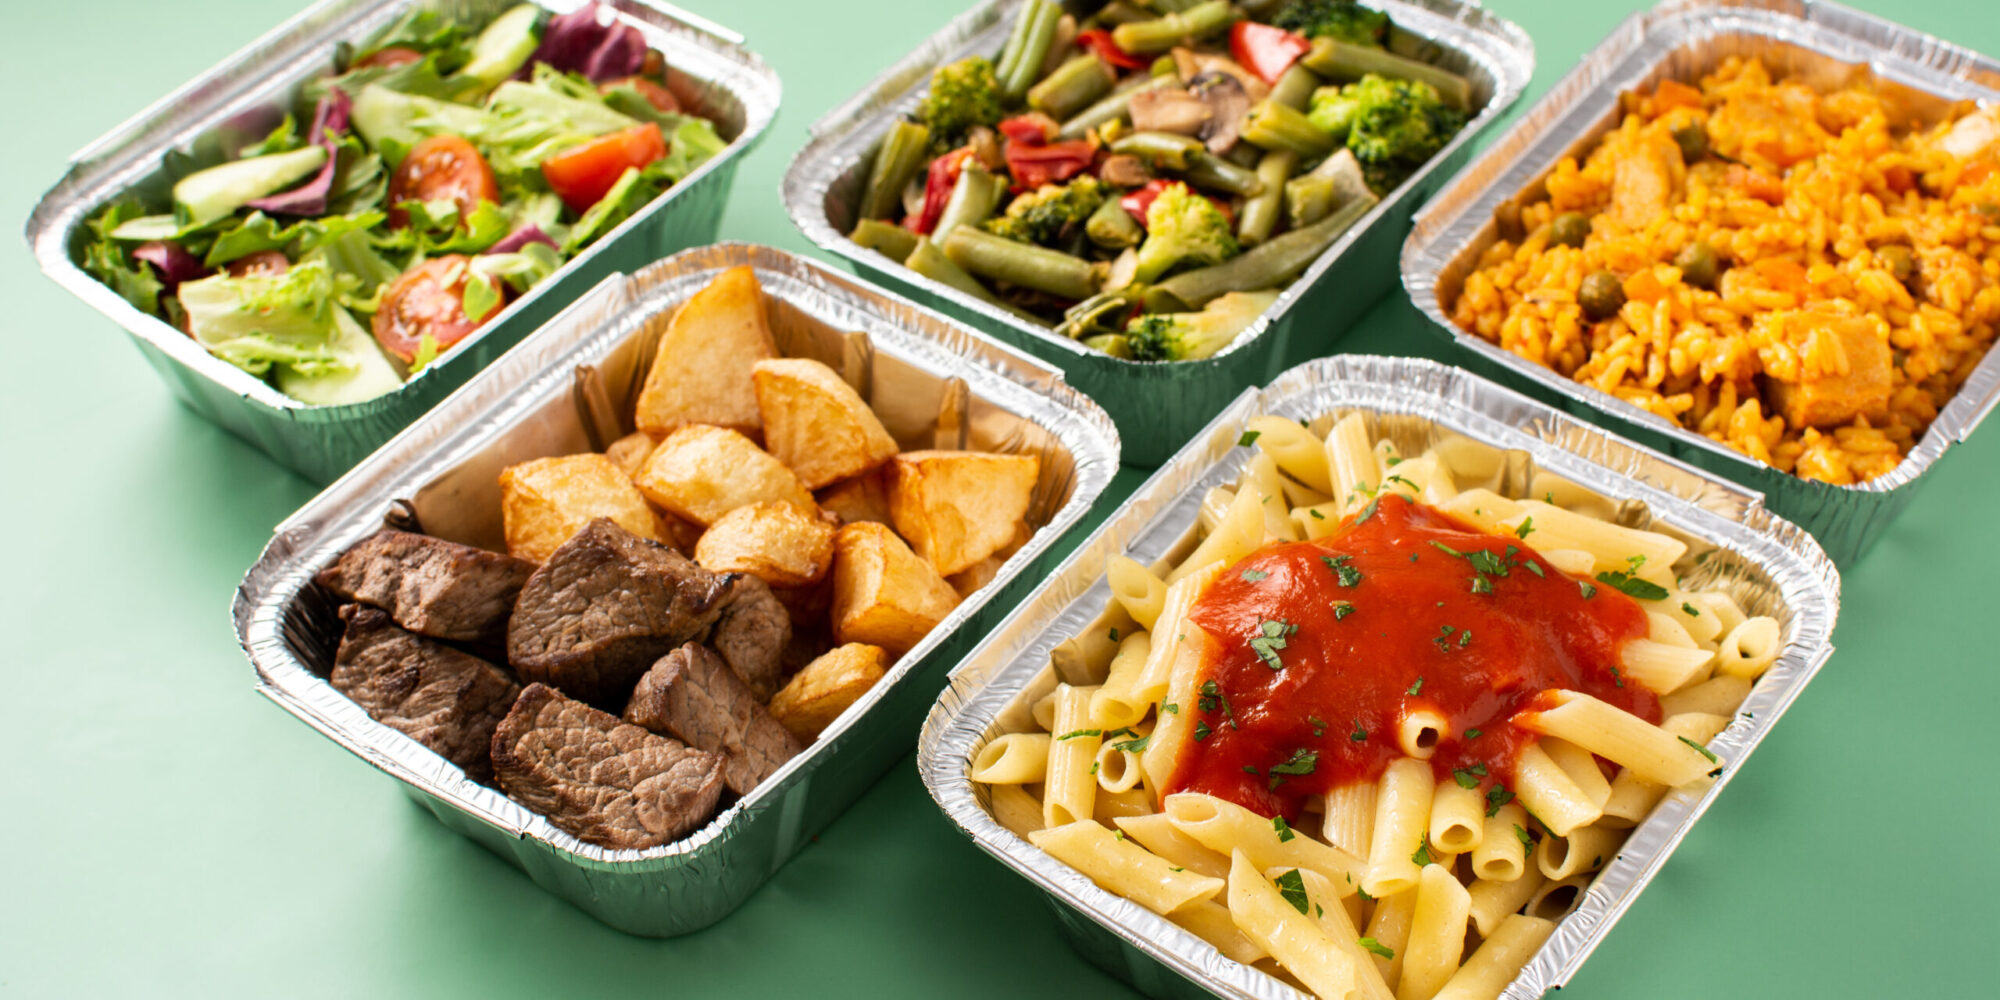 Take,Away,Healthy,Food,In,Foil,Boxes,On,Green,Background